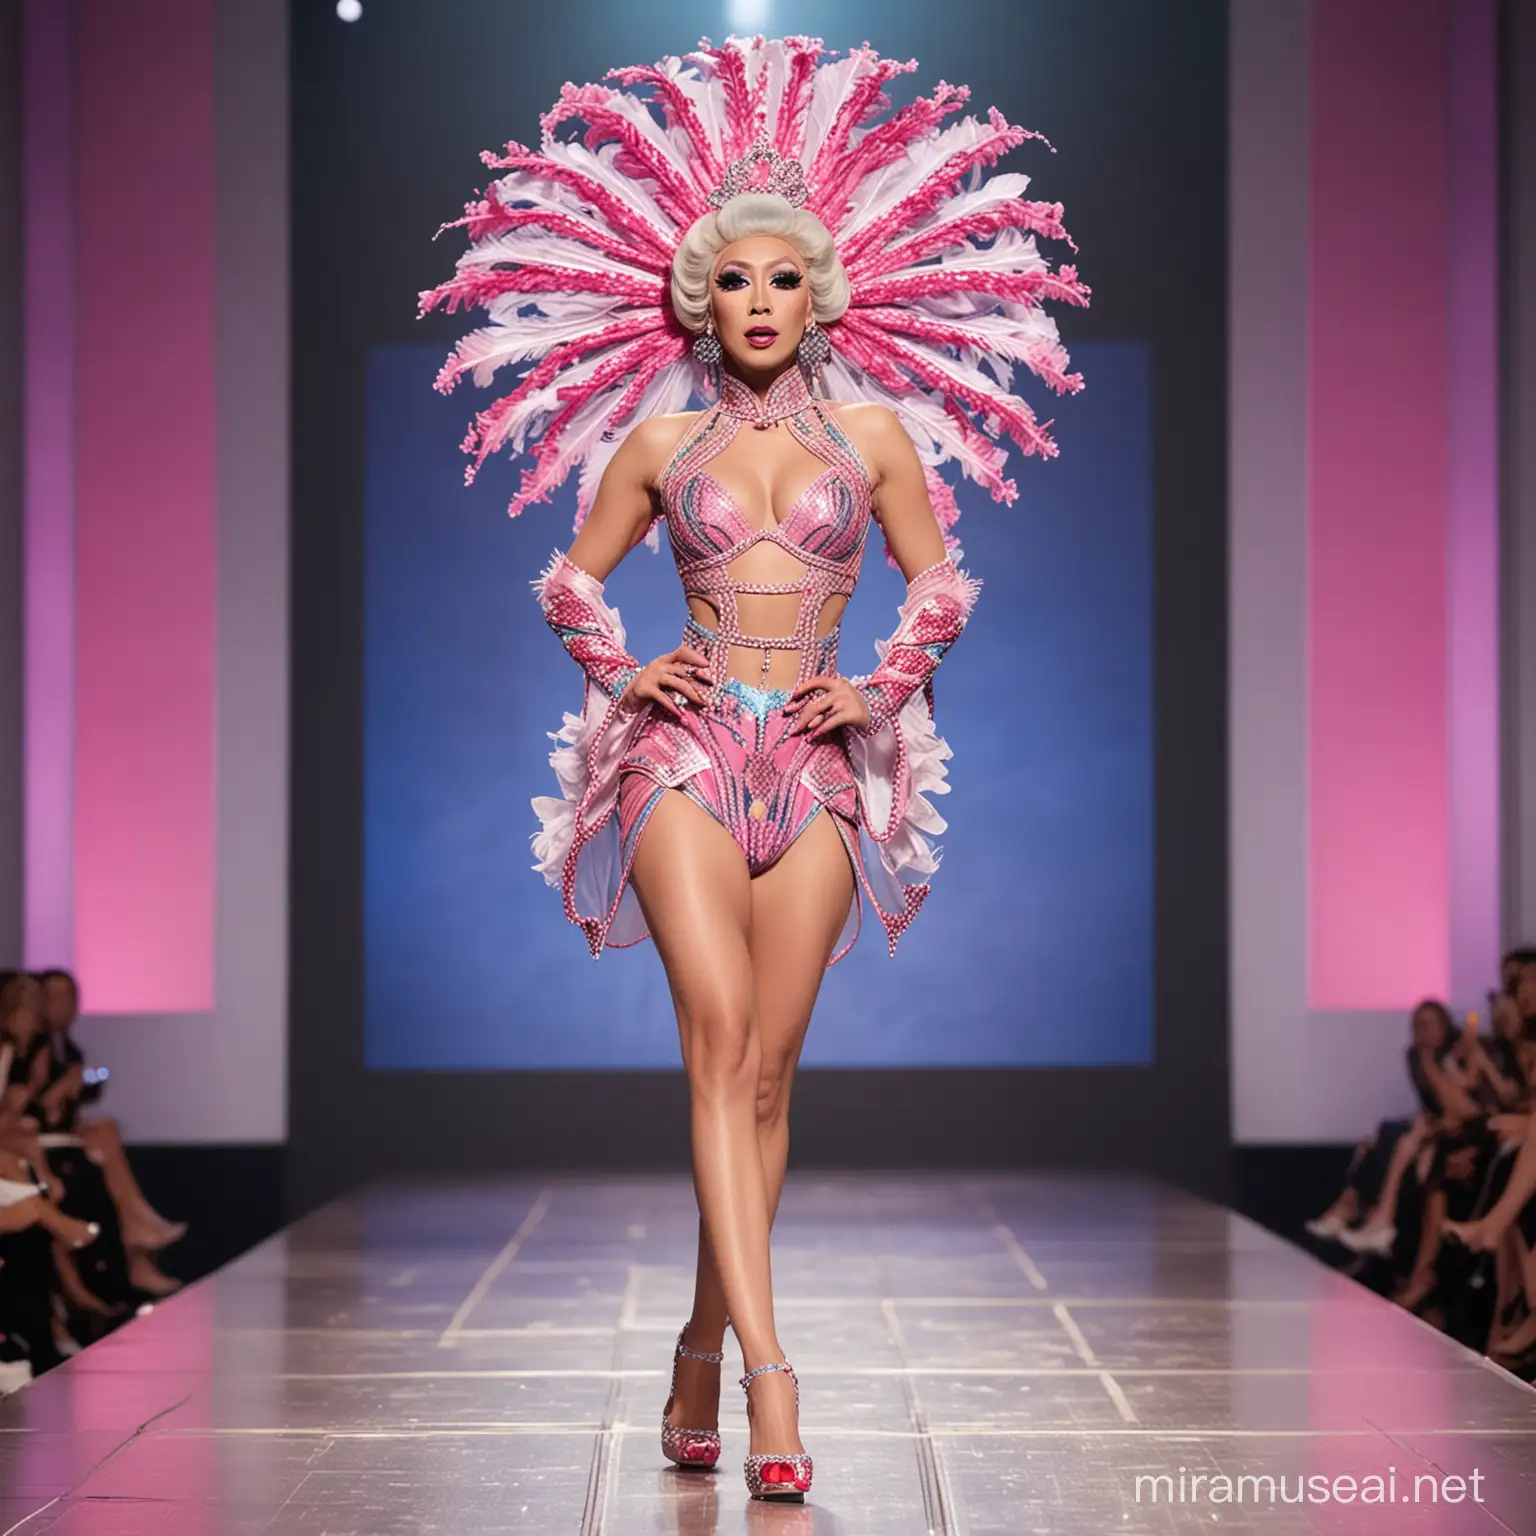 Skinny Chinese Drag Queen Struts on RuPauls Drag Race Runway in EngineInspired Outfit